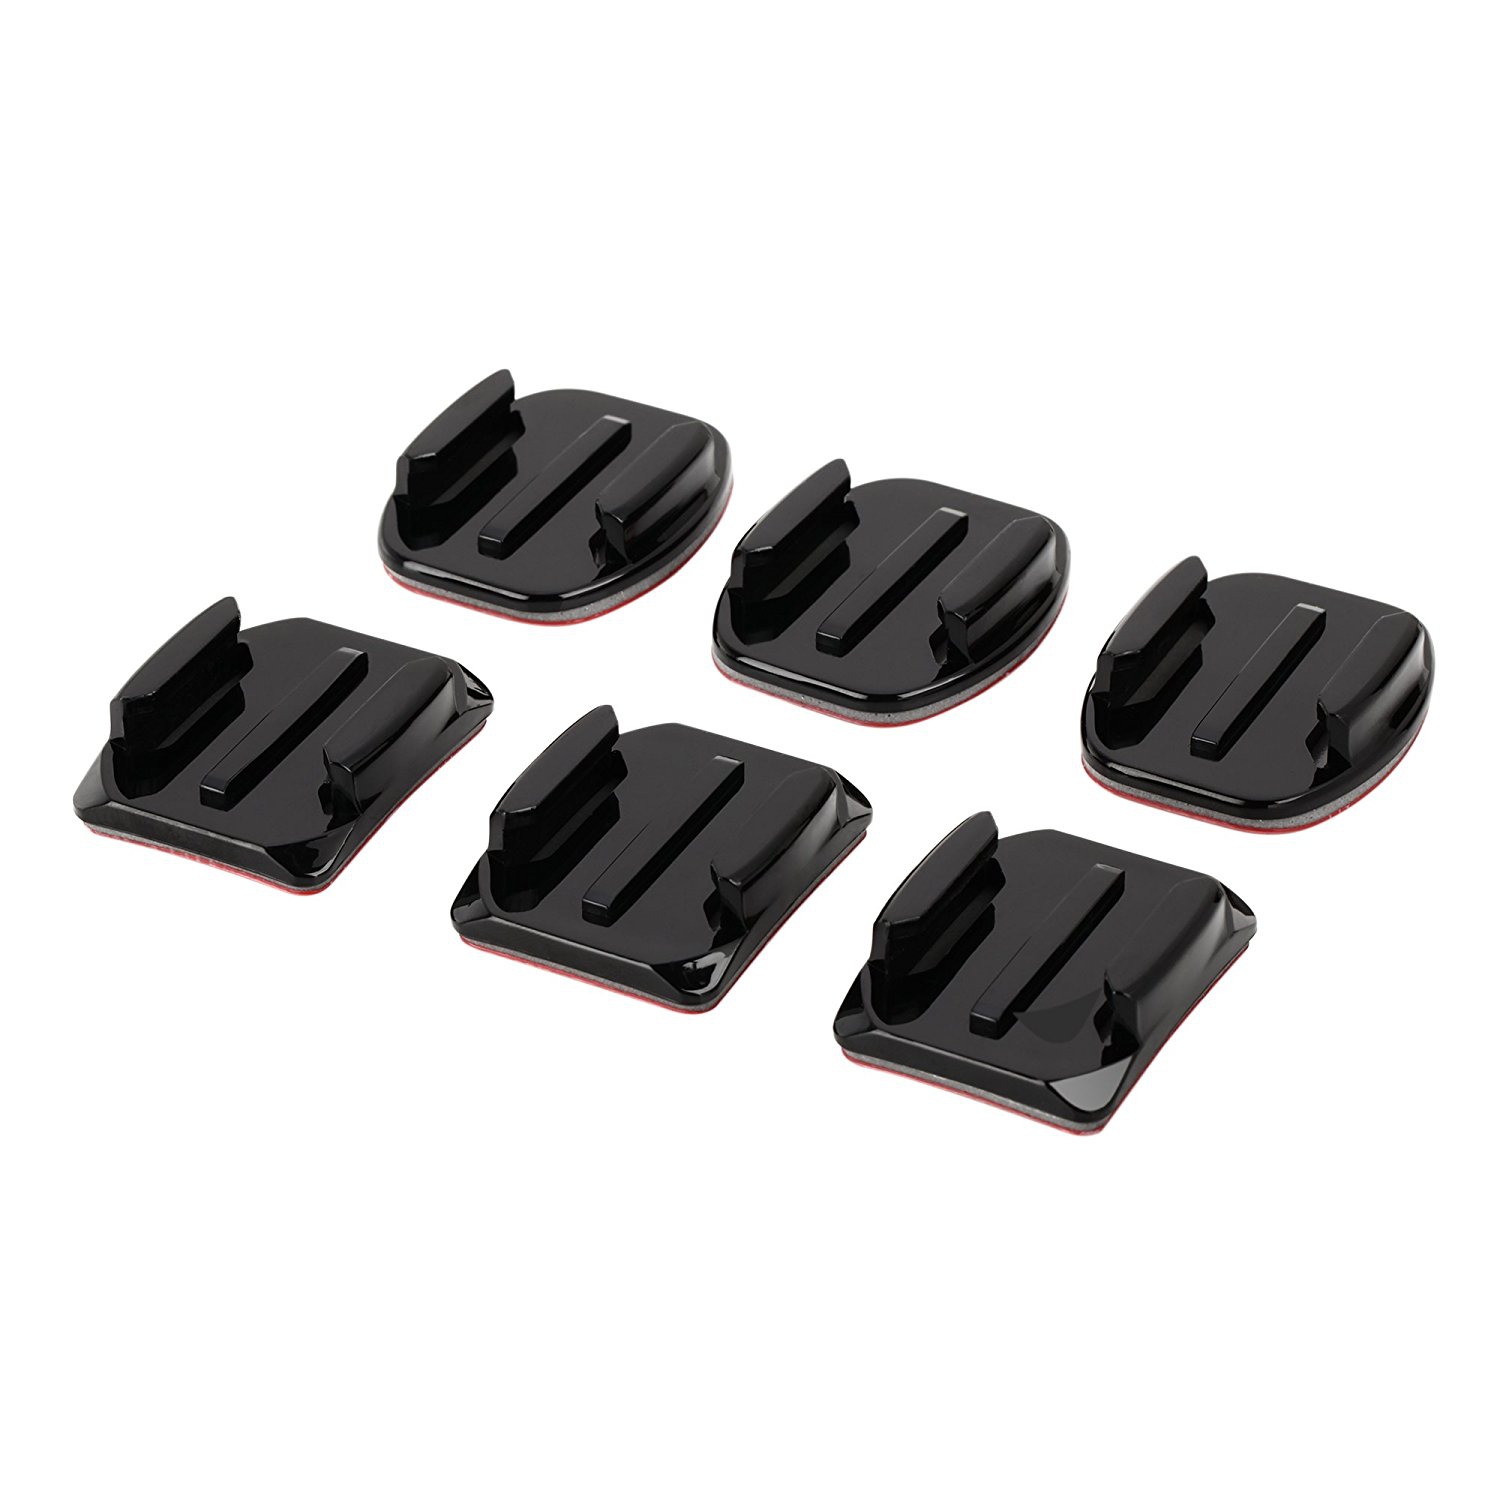 Ultimaxx 3 Flat Mounts and 3 Curved Mounts with 3m Double Sided Adhesive Pads Use with Helmet, Bike, Board, Carfor For All GoP